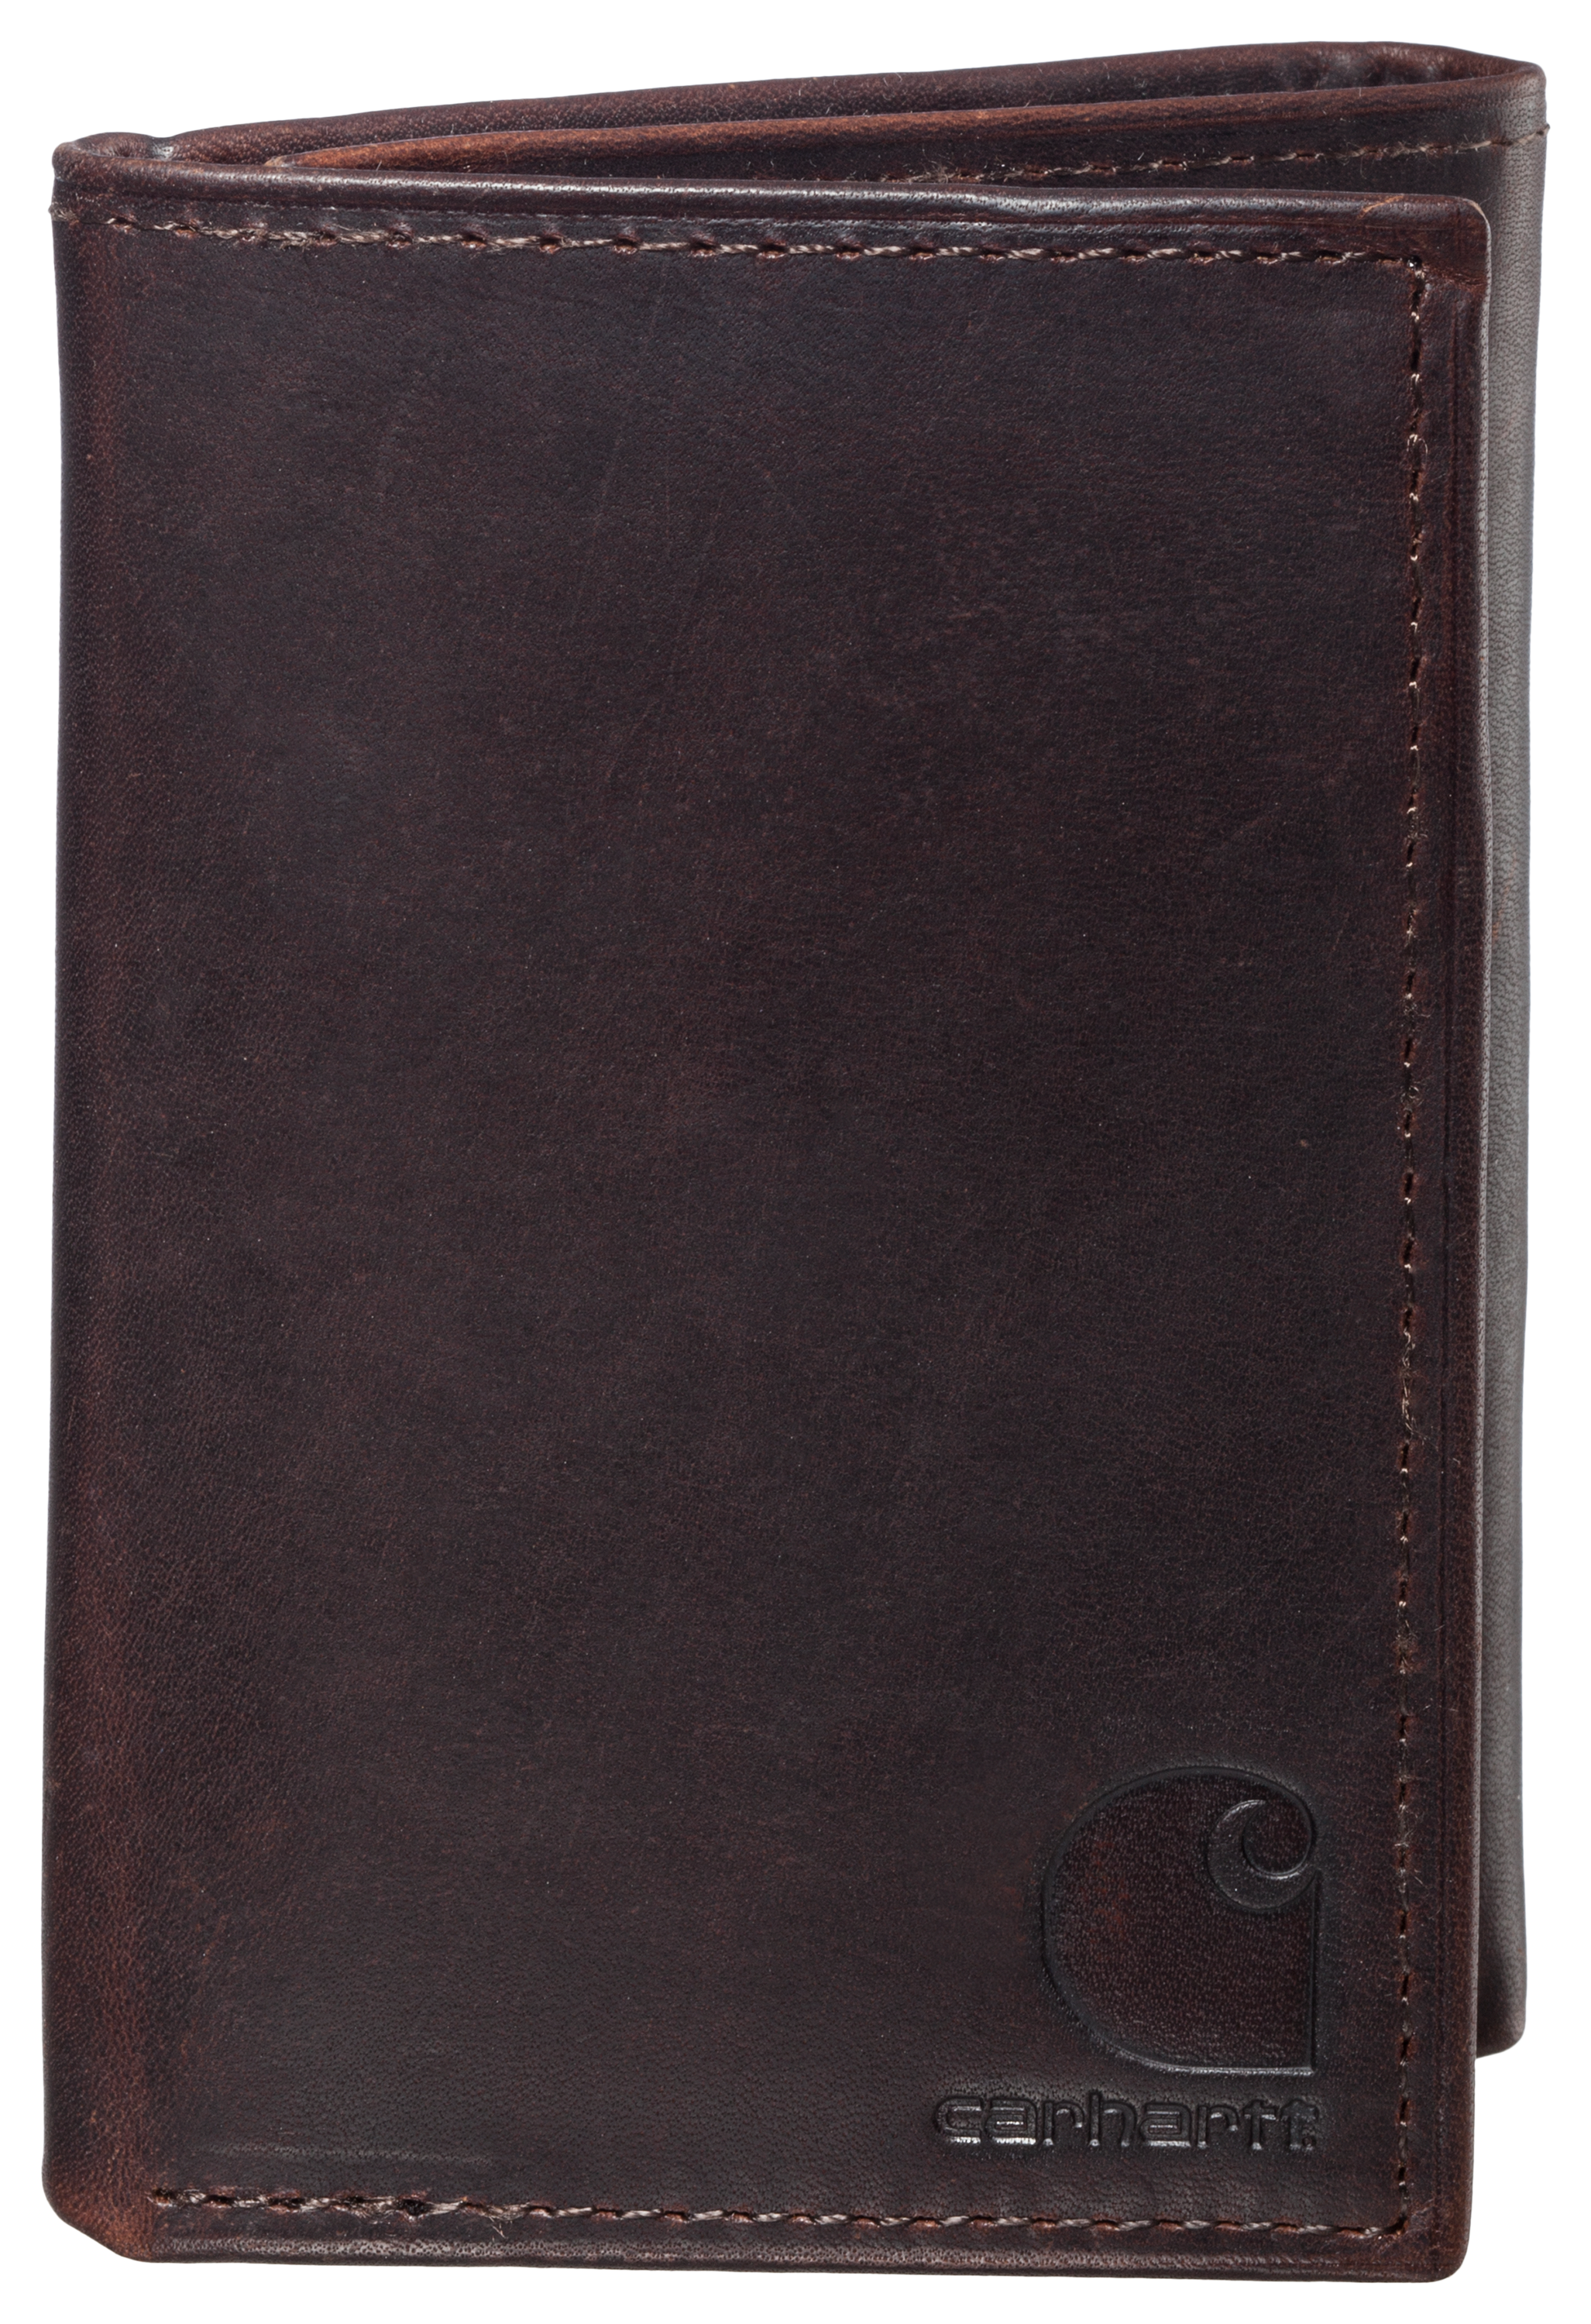 Carhartt Oil Tan Trifold Leather Wallet | Bass Pro Shops